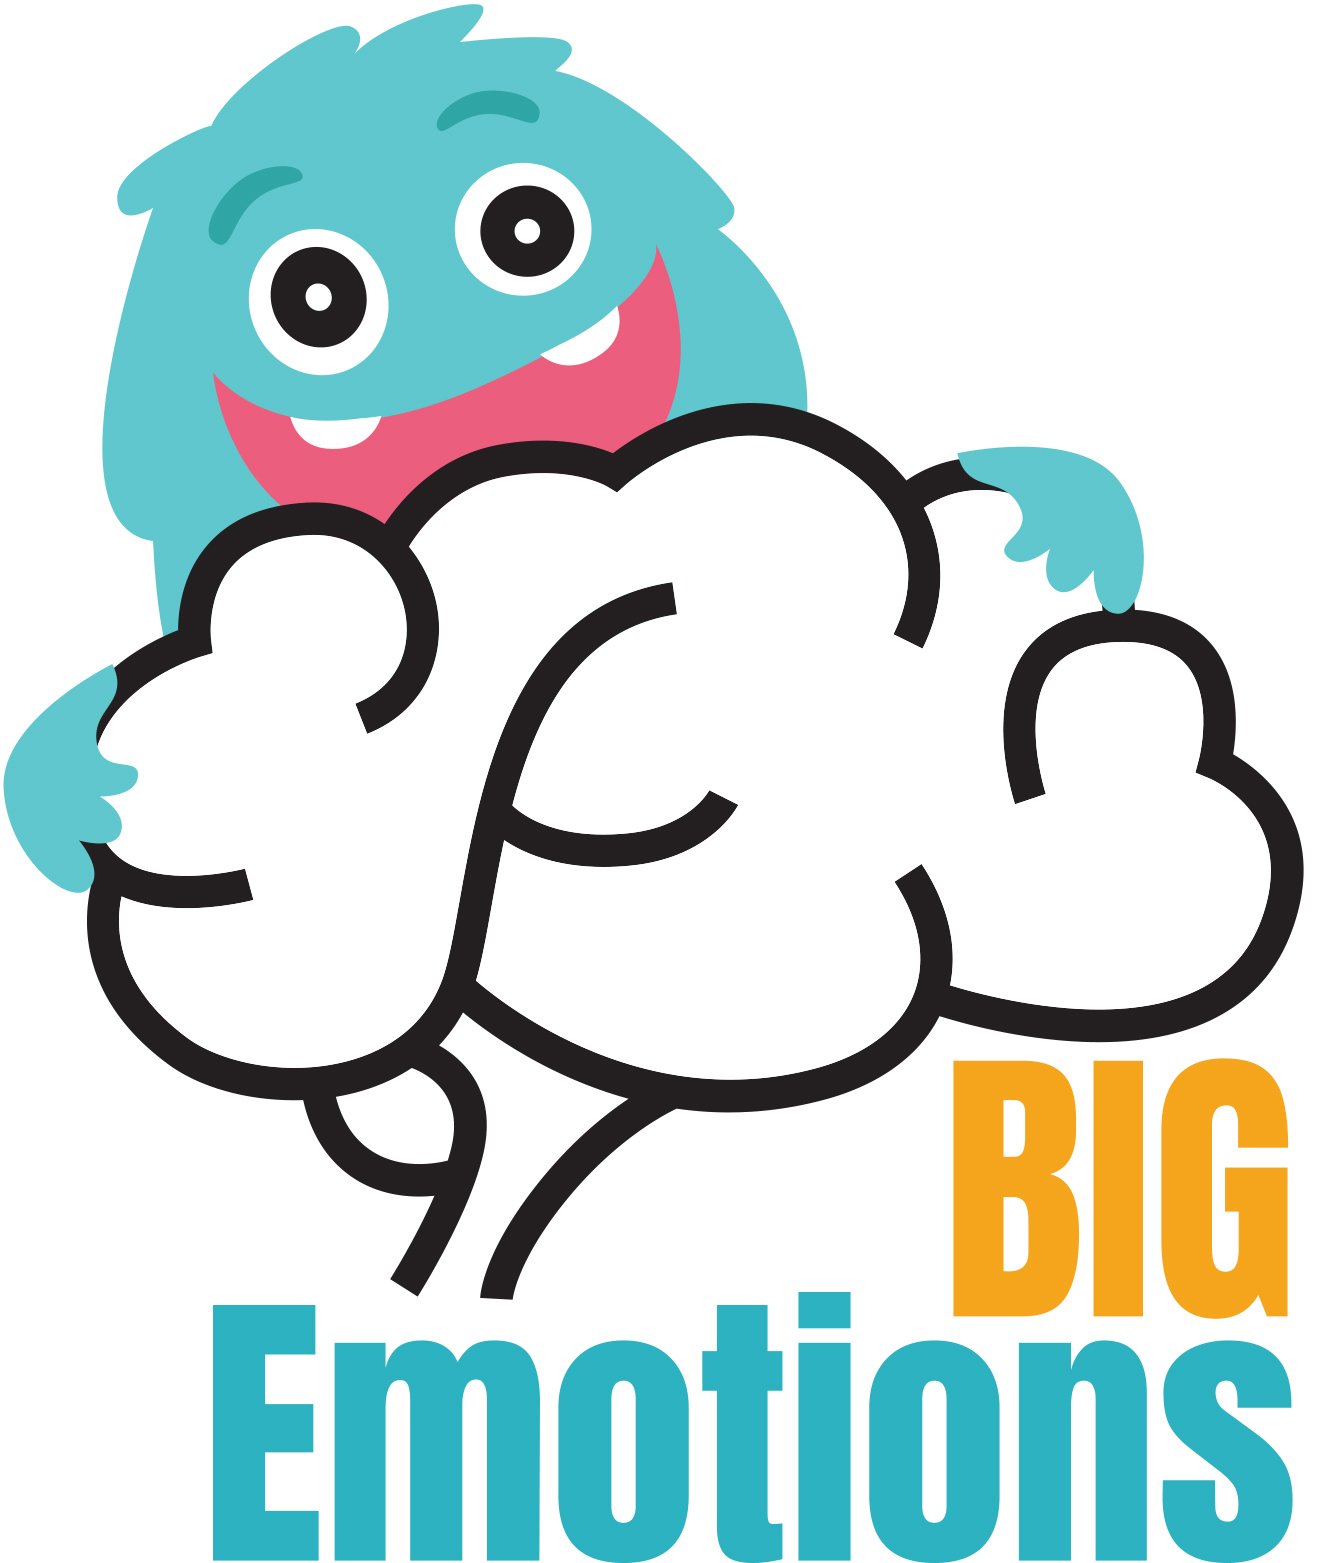 BIG-Emotions Study Logo with a light blue monster hugging a brain-shaped cloud and text reading "BIG Emotions"